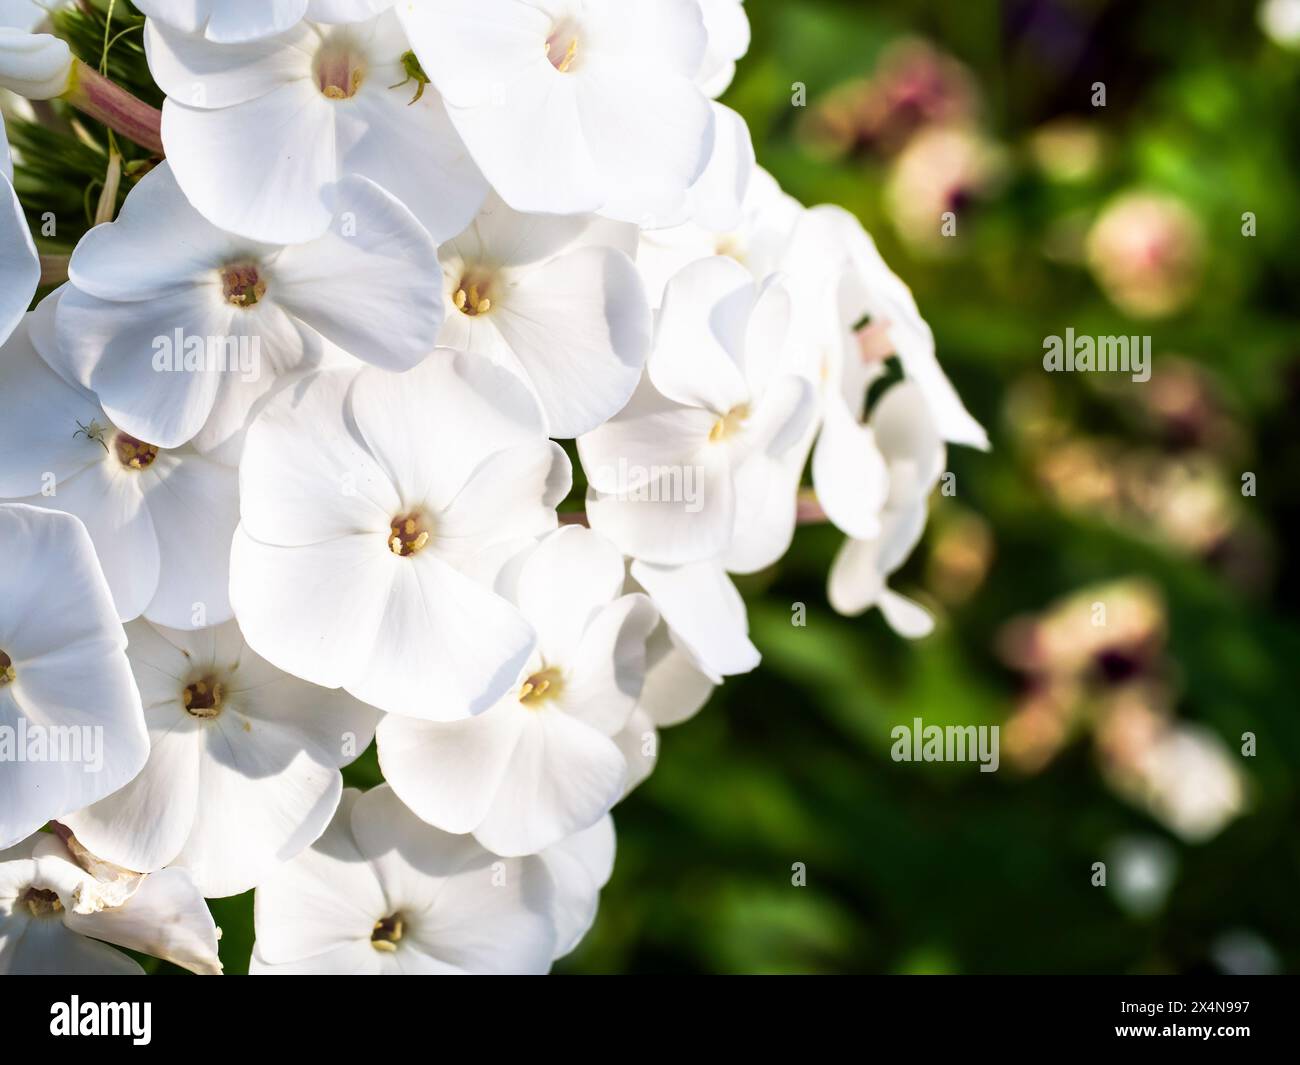 Bright white petals contrast against a backdrop of rich green leaves; this image radiates tranquility and is apt for meditation or relaxation visuals. Stock Photo